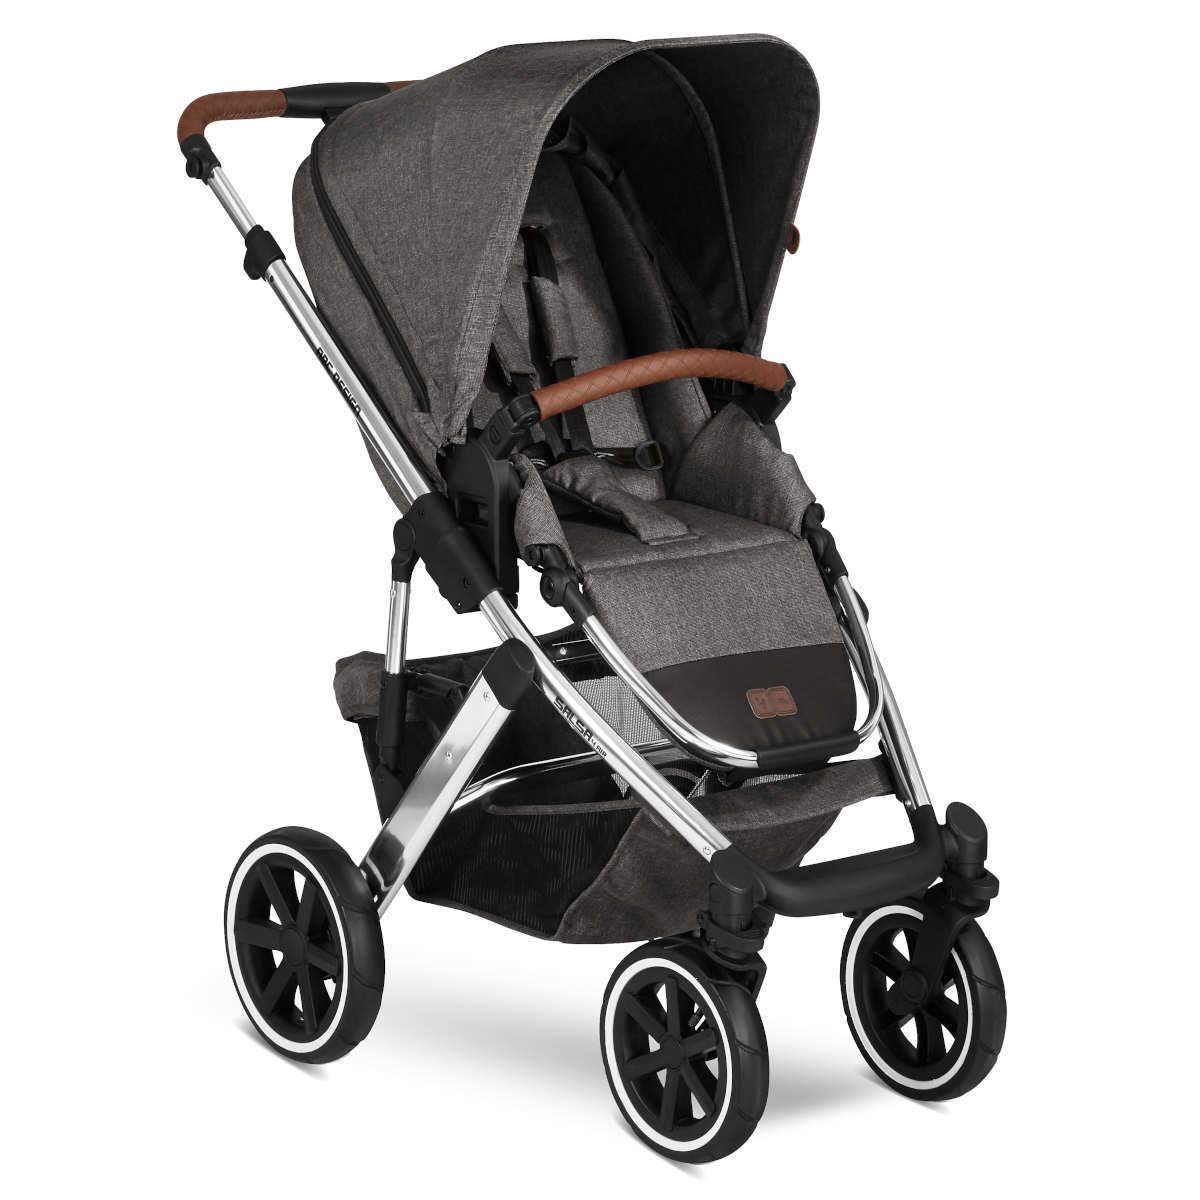 ABC Design 2 in 1 Salsa 4 Air Diamond Edition Pushchair - 2021 Collection - Combination Pushchair for Newborns & Babies - Includes Sports Seat Buggy & Carrycot - Wheel Suspension & Pneumatic Tyres - Colour: Asphalt